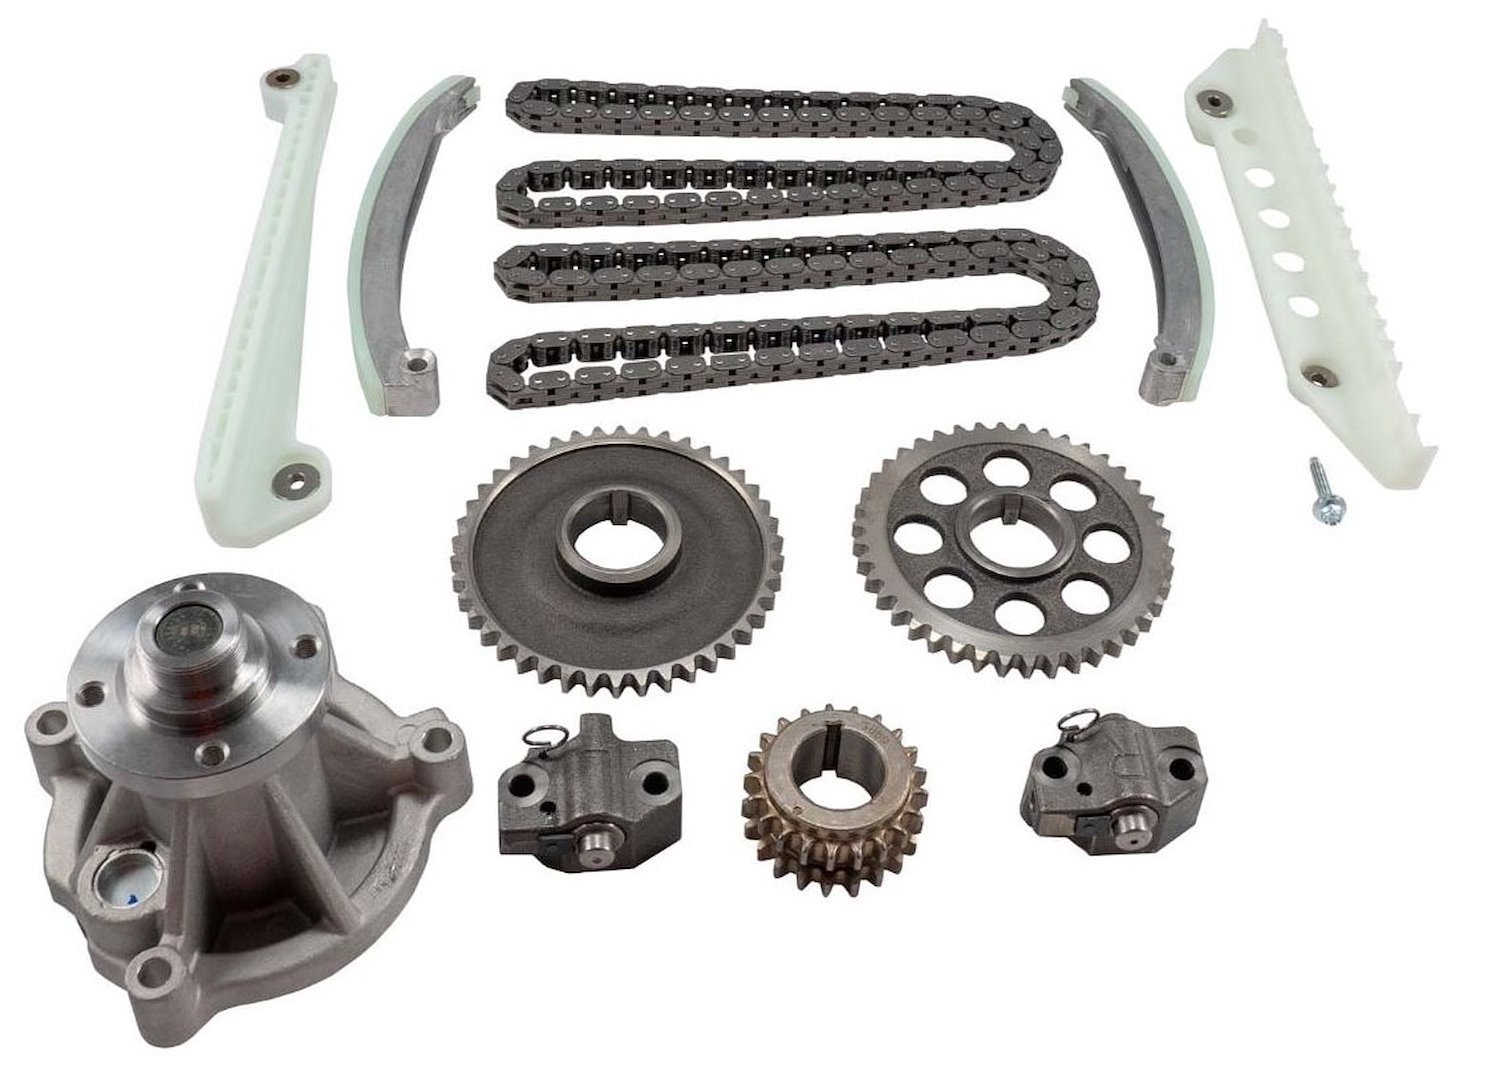 Replacement Engine Timing Chain Kit w/Water Pump Fits Select 1999-2008 Ford Cars, Trucks, SUVs w/4.6L Engine